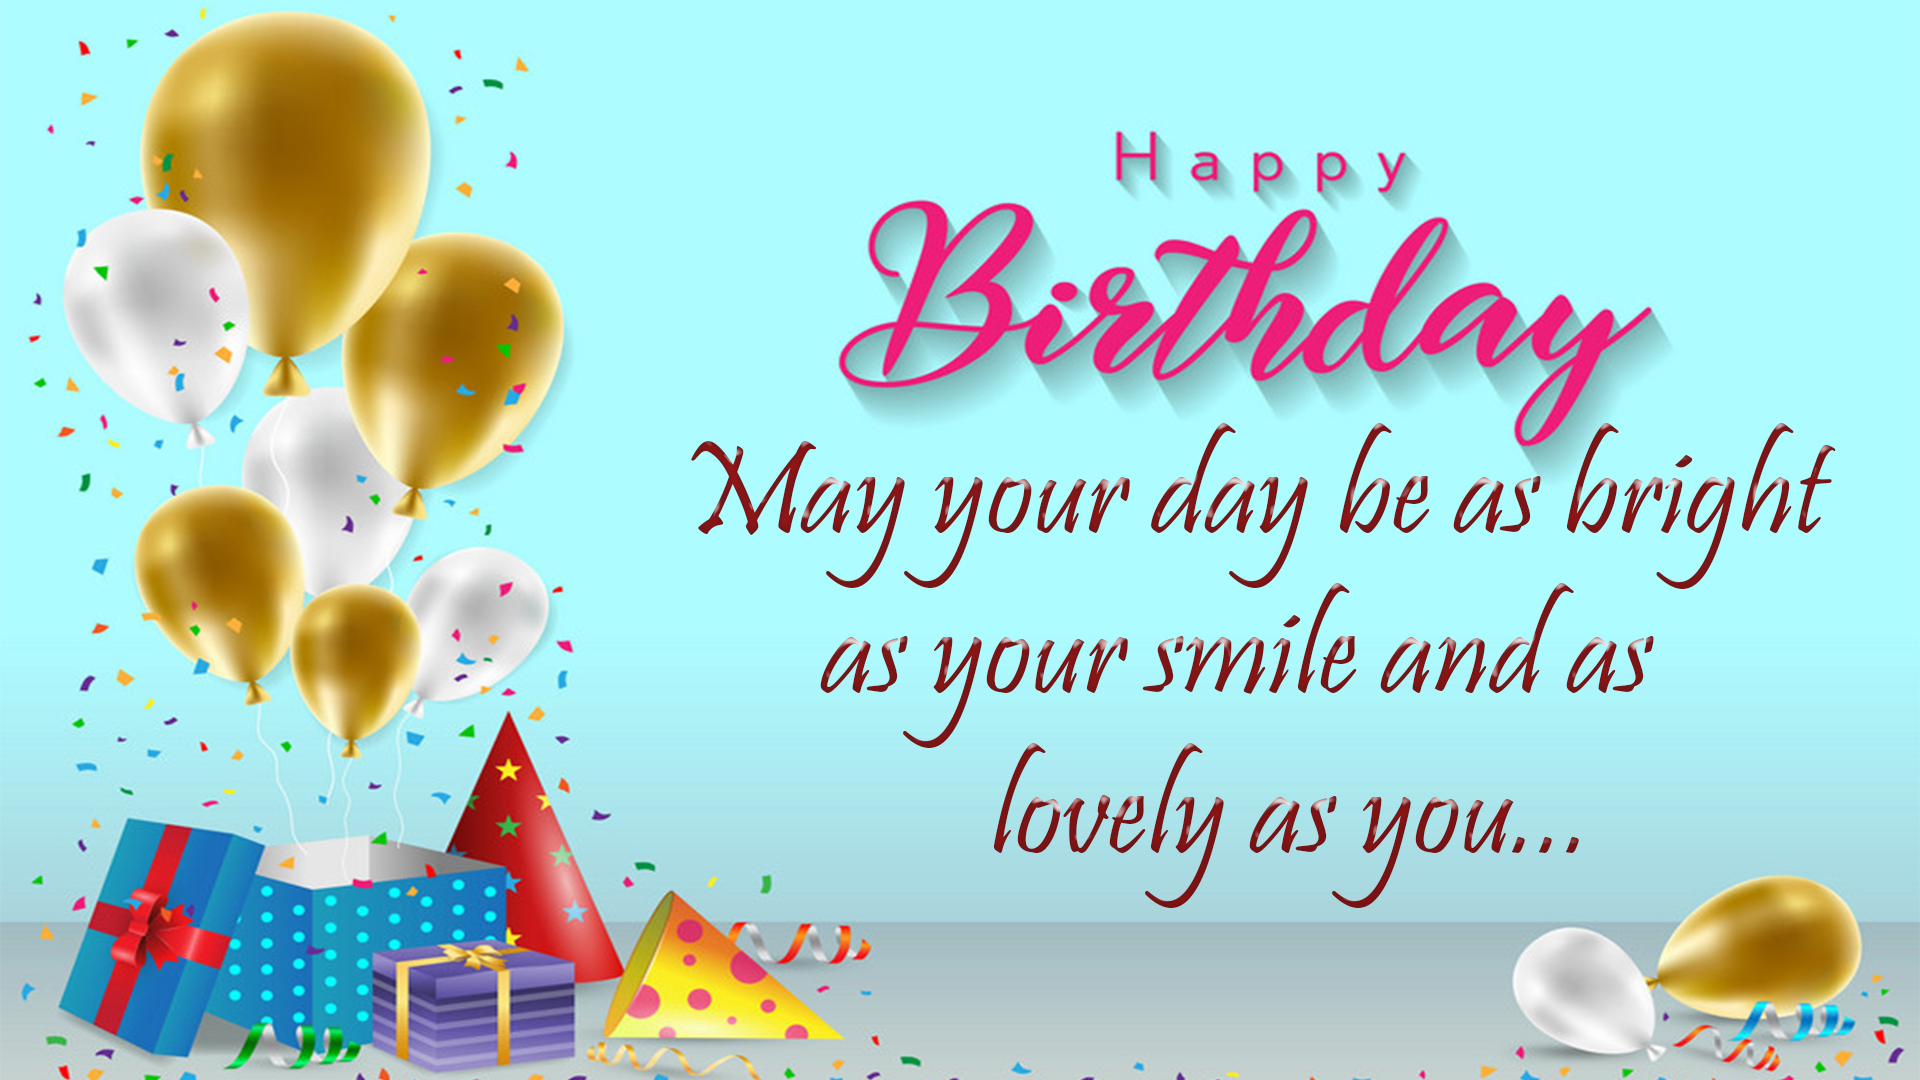 Beautiful Birthday Wishes & Greeting Cards & Images